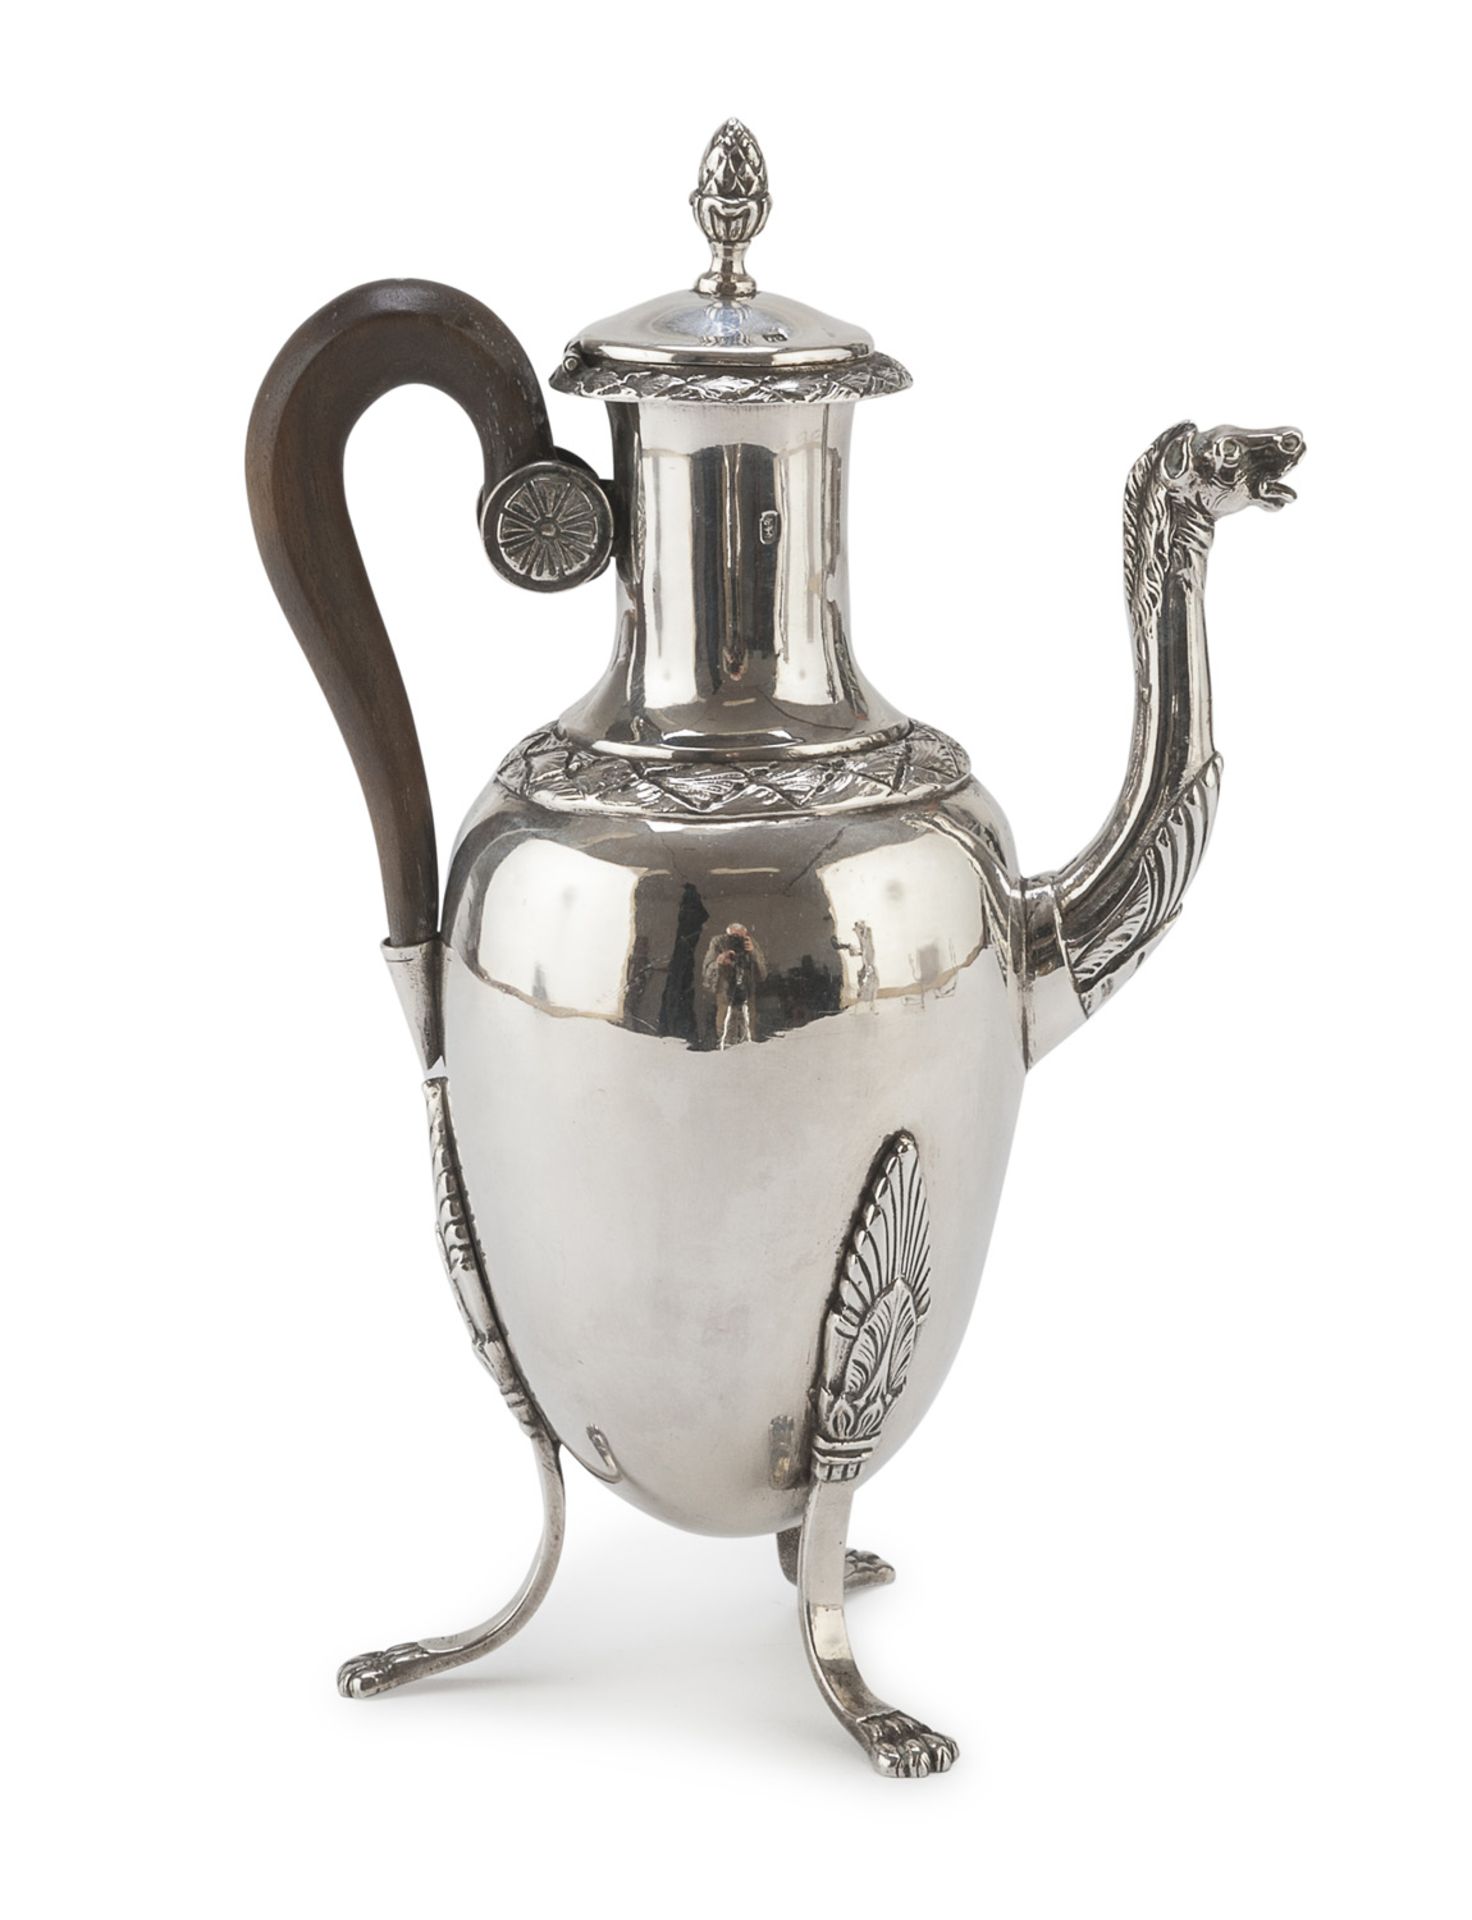 SMALL SILVER COFFEE POT PROBABLY FRANCE LATE 18TH CENTURY